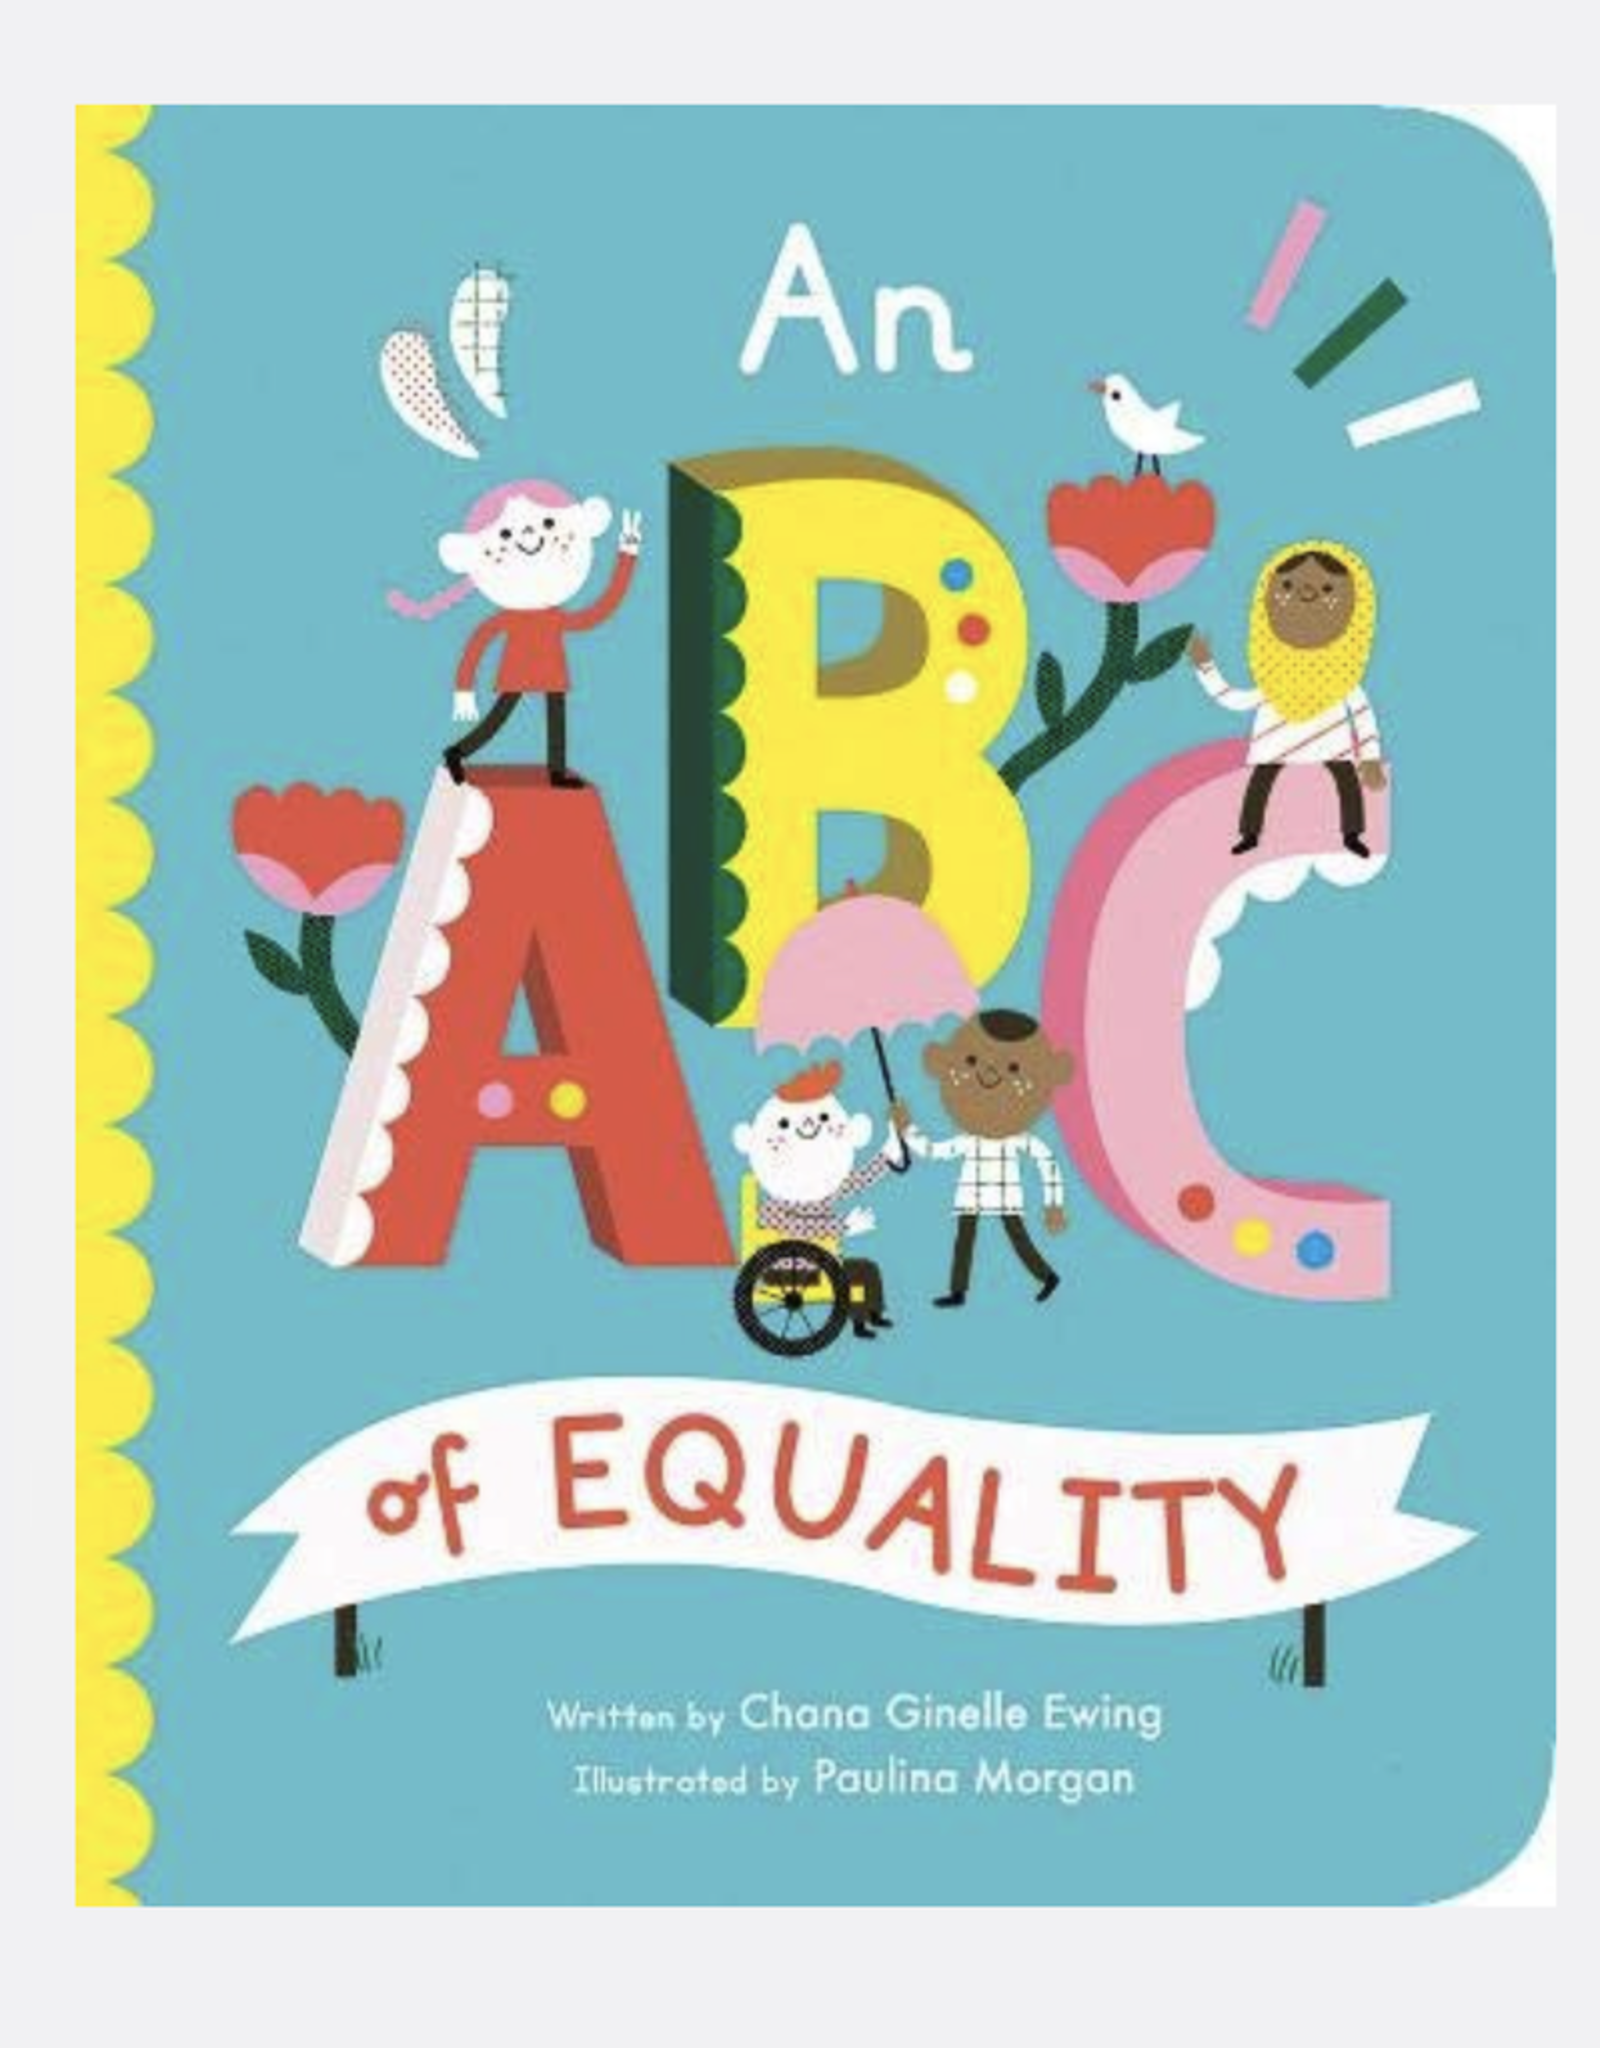 An ABC of Equality by: Chana Ginelle Ewing